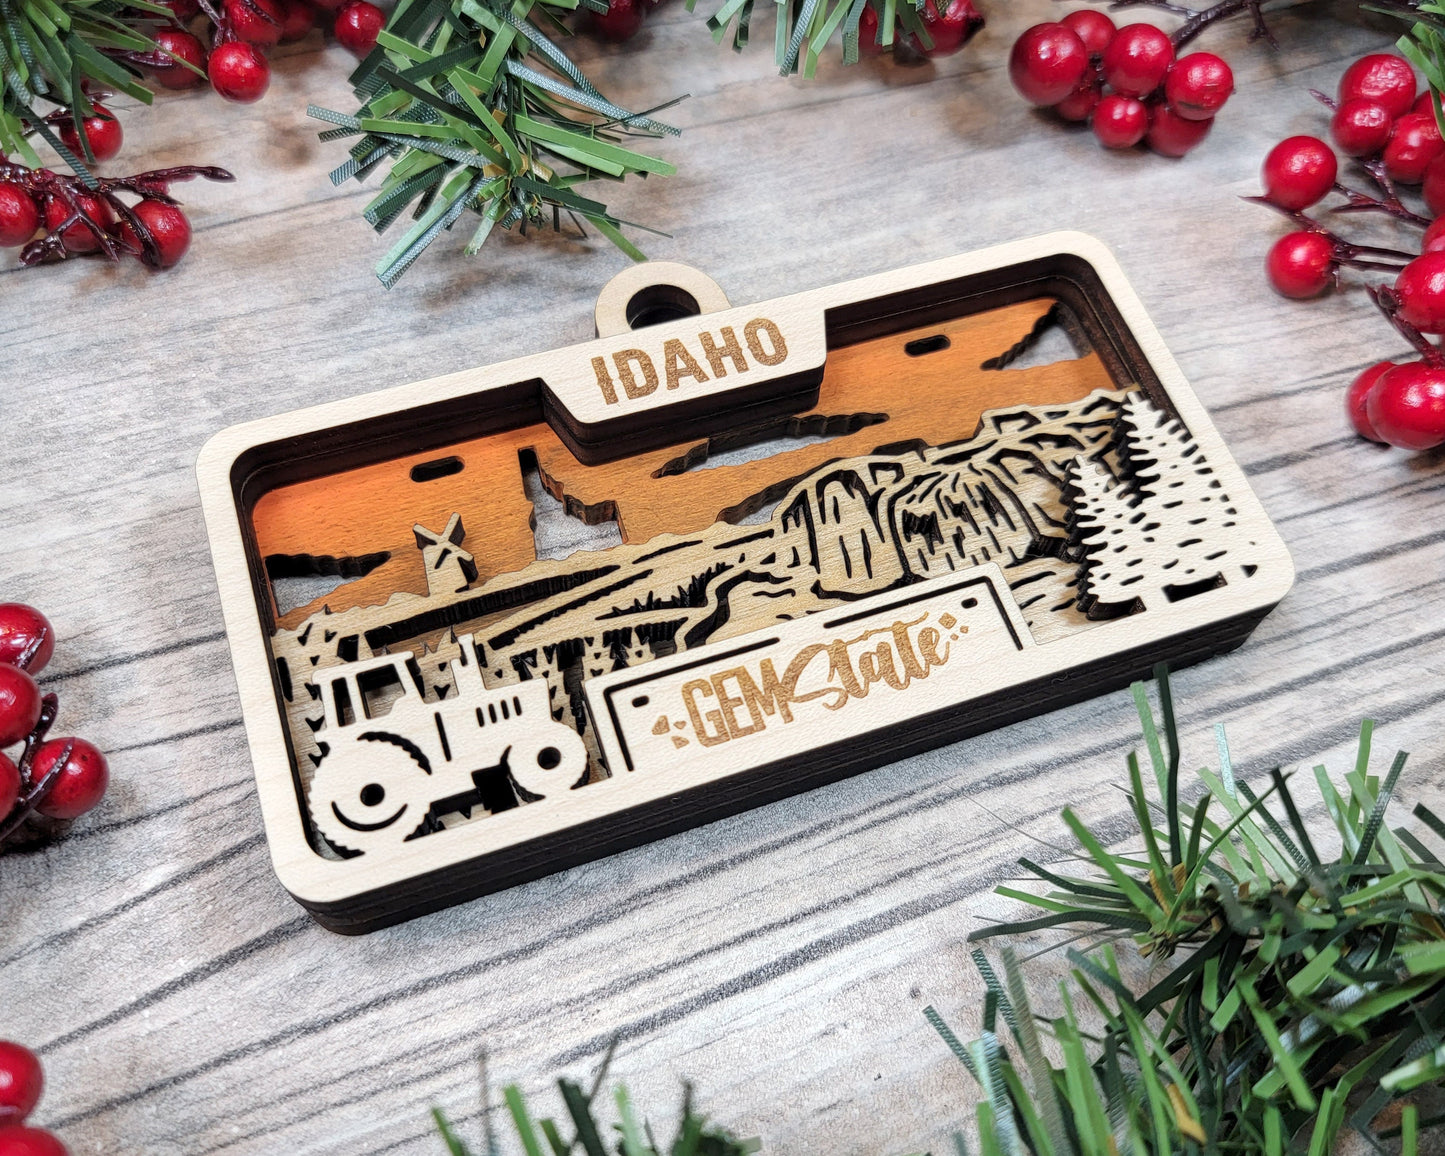 Idaho State Plate Ornament and Signage - SVG File Download - Sized for Glowforge - Laser Ready Digital Files